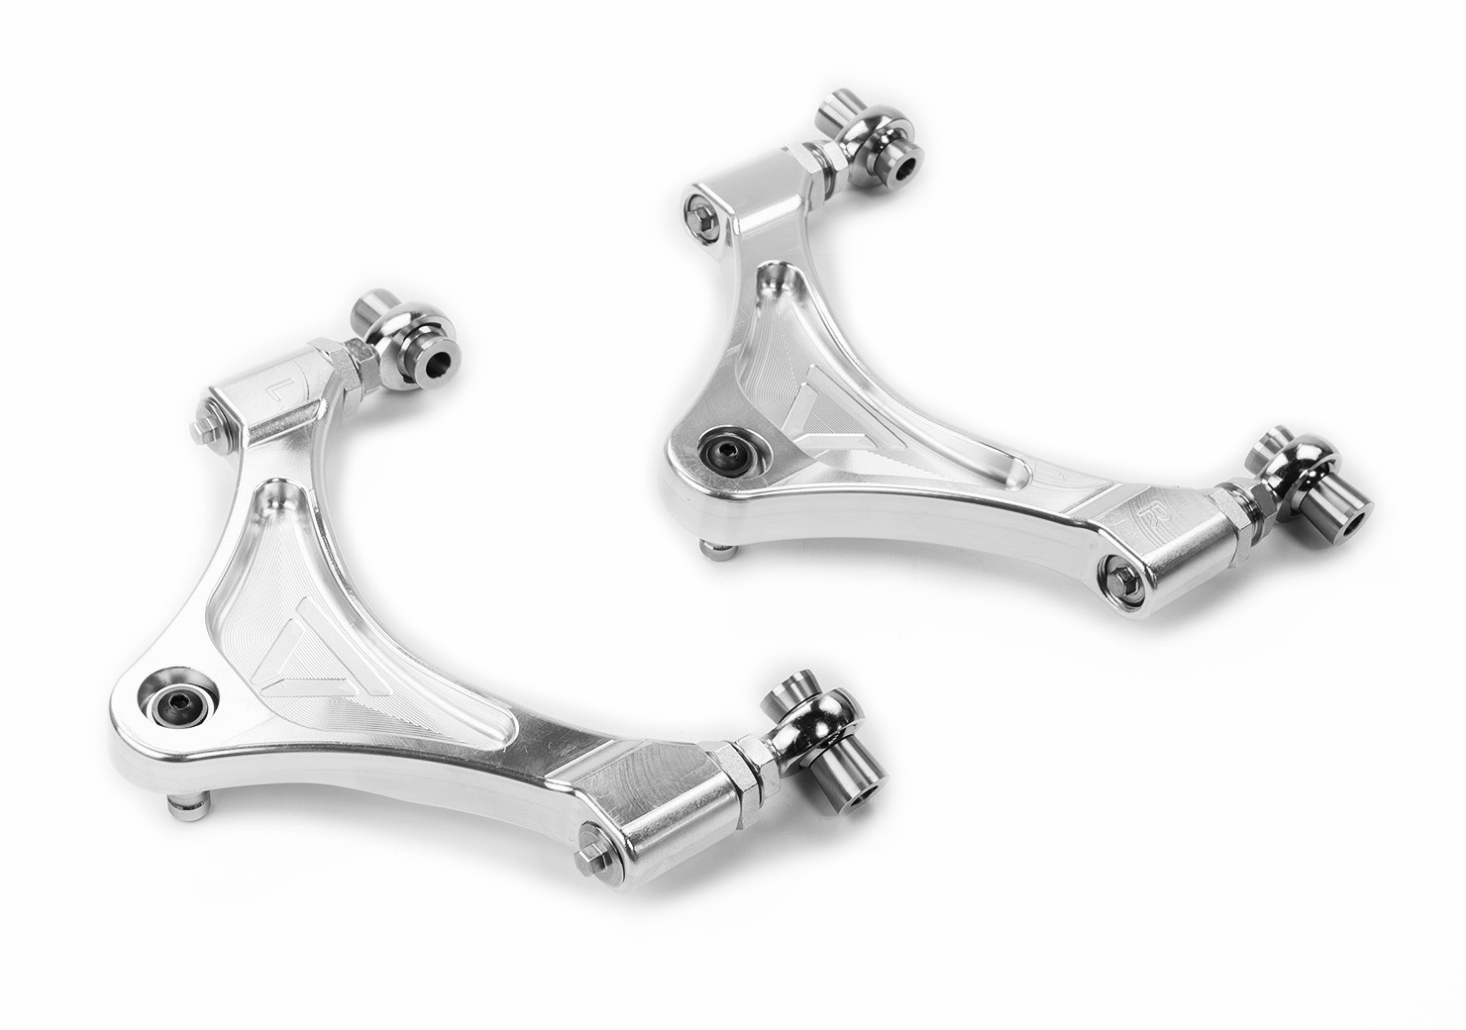 Voodoo 13 Front Upper Adjustable Control Arms, Camber / Caster - Nissan GT-R 09+ R35